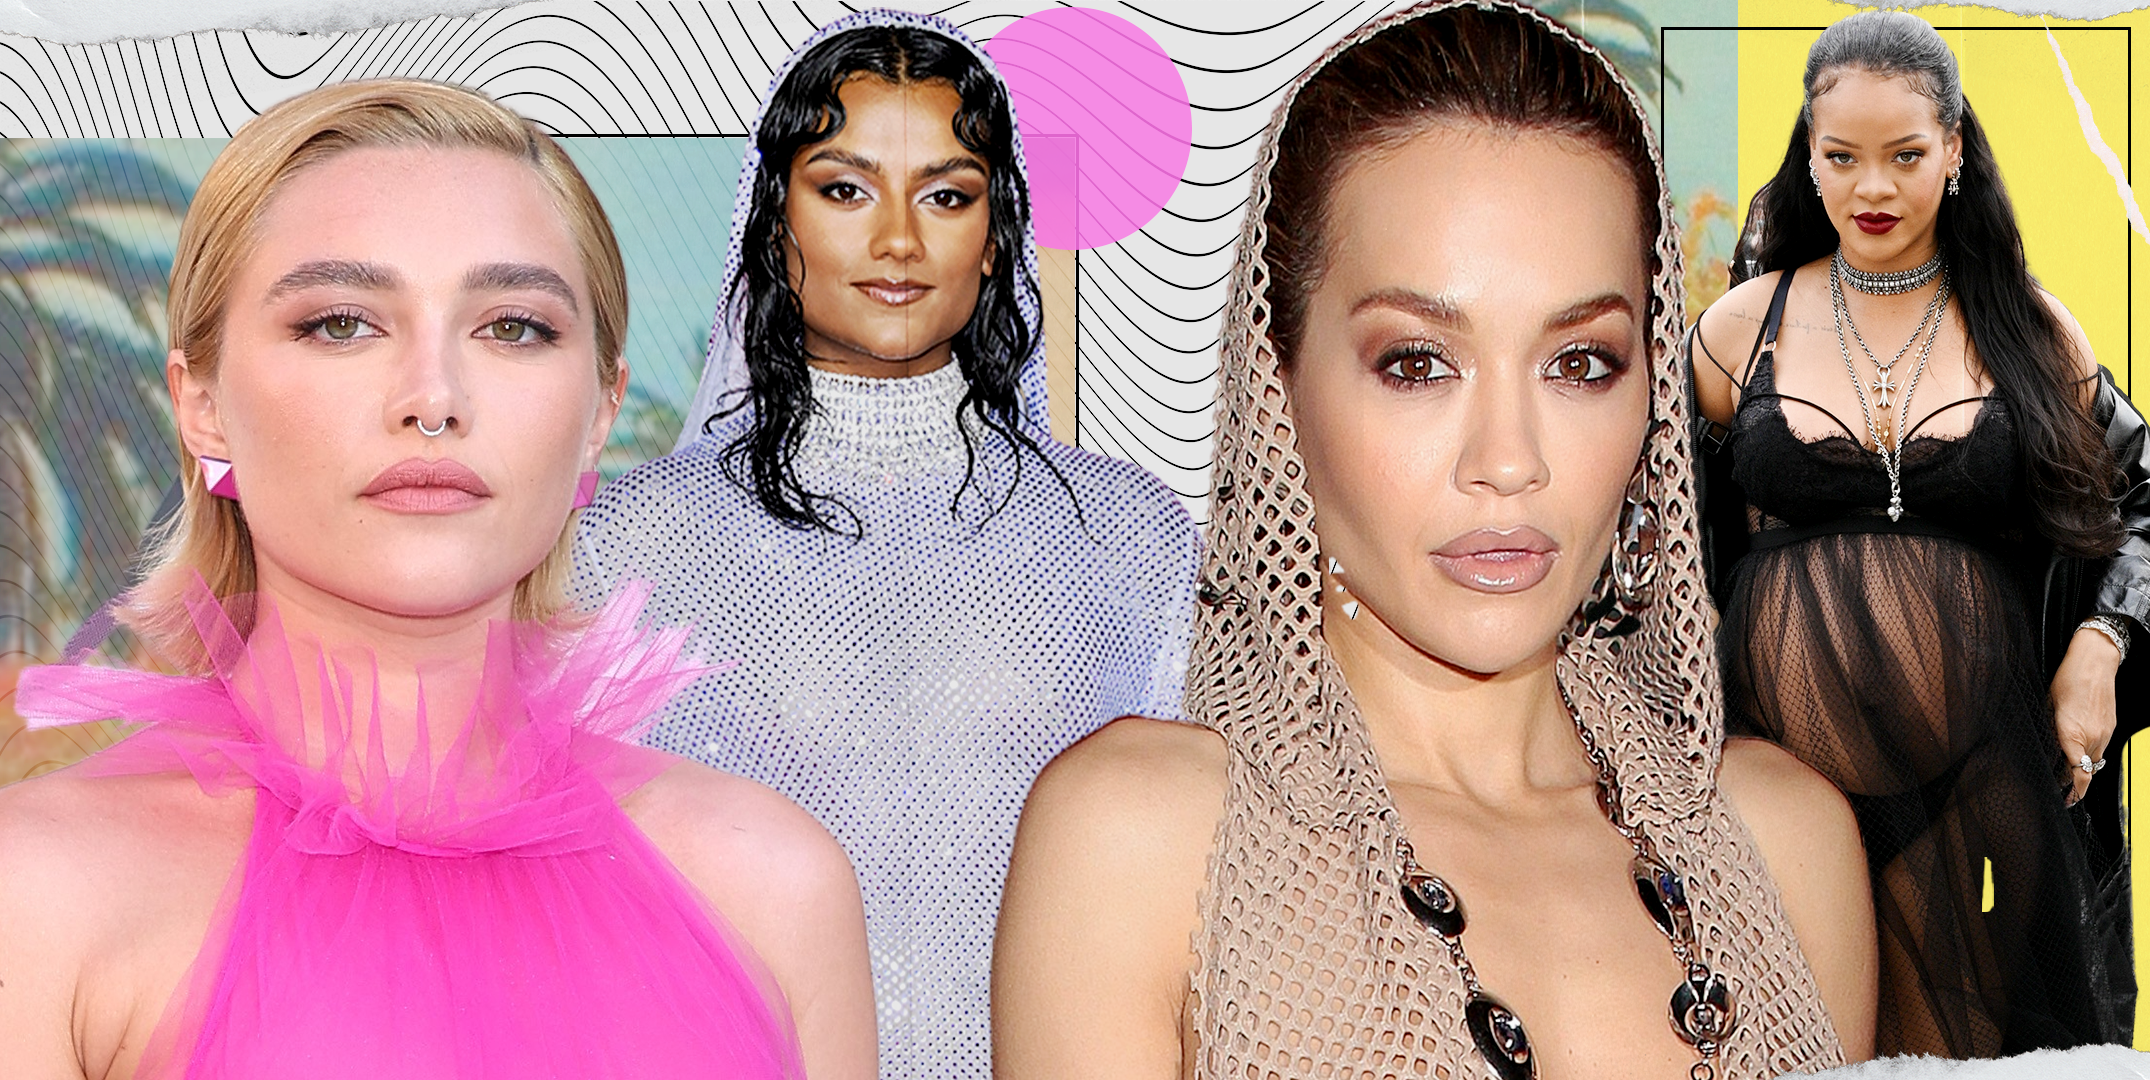 Can we talk about how celebrity style has got more naked?